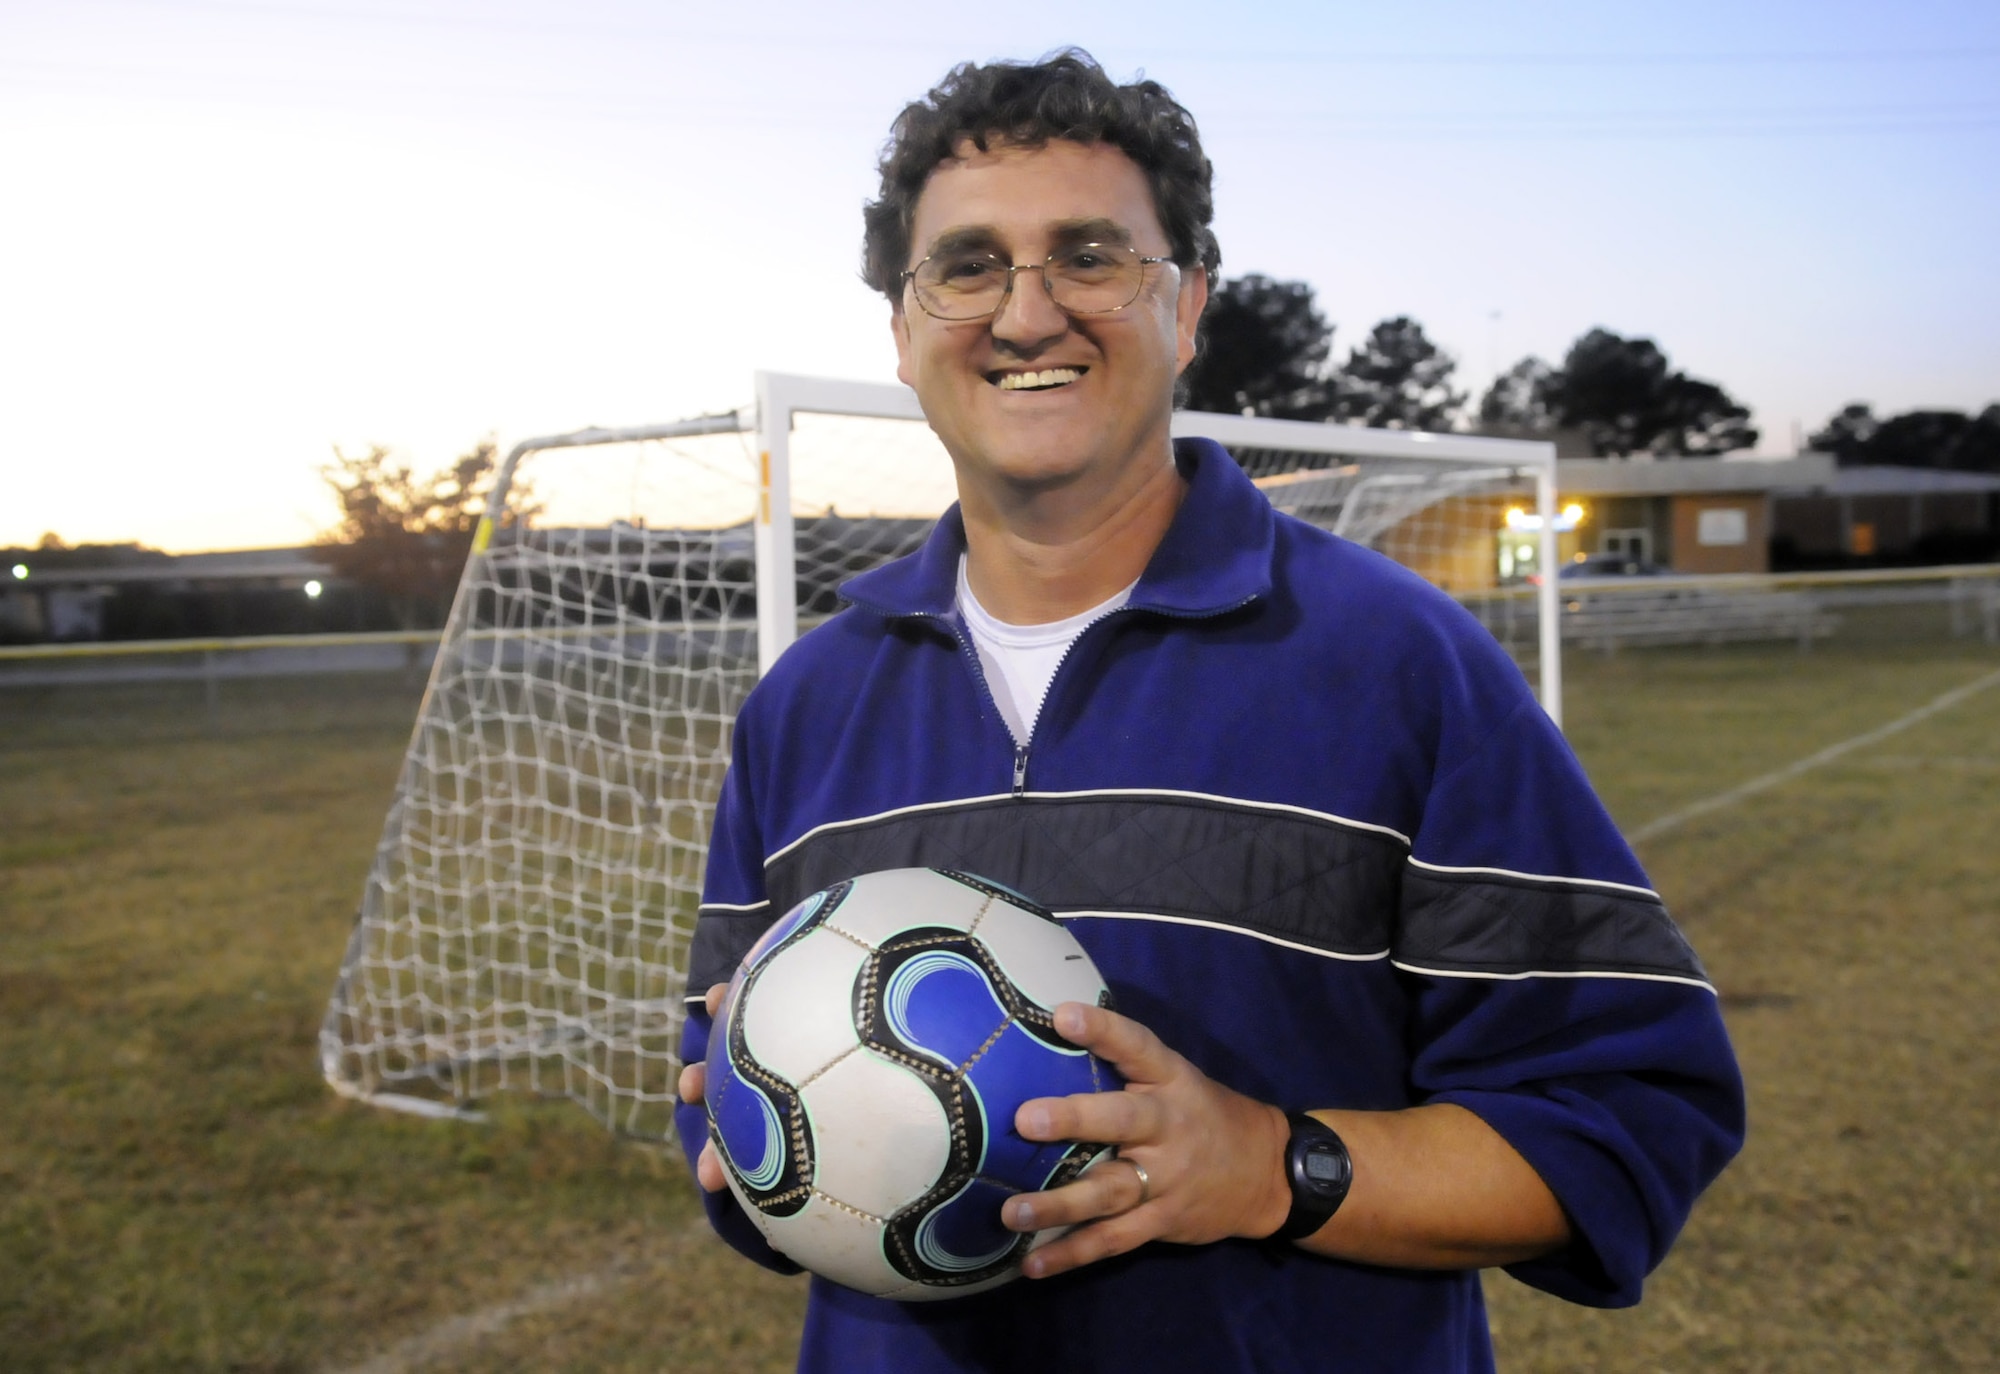 Don Wendland was named the 2009 National Alliance of Youth Sports Coach of the year. U. S. Air Force photo by Sue Sapp